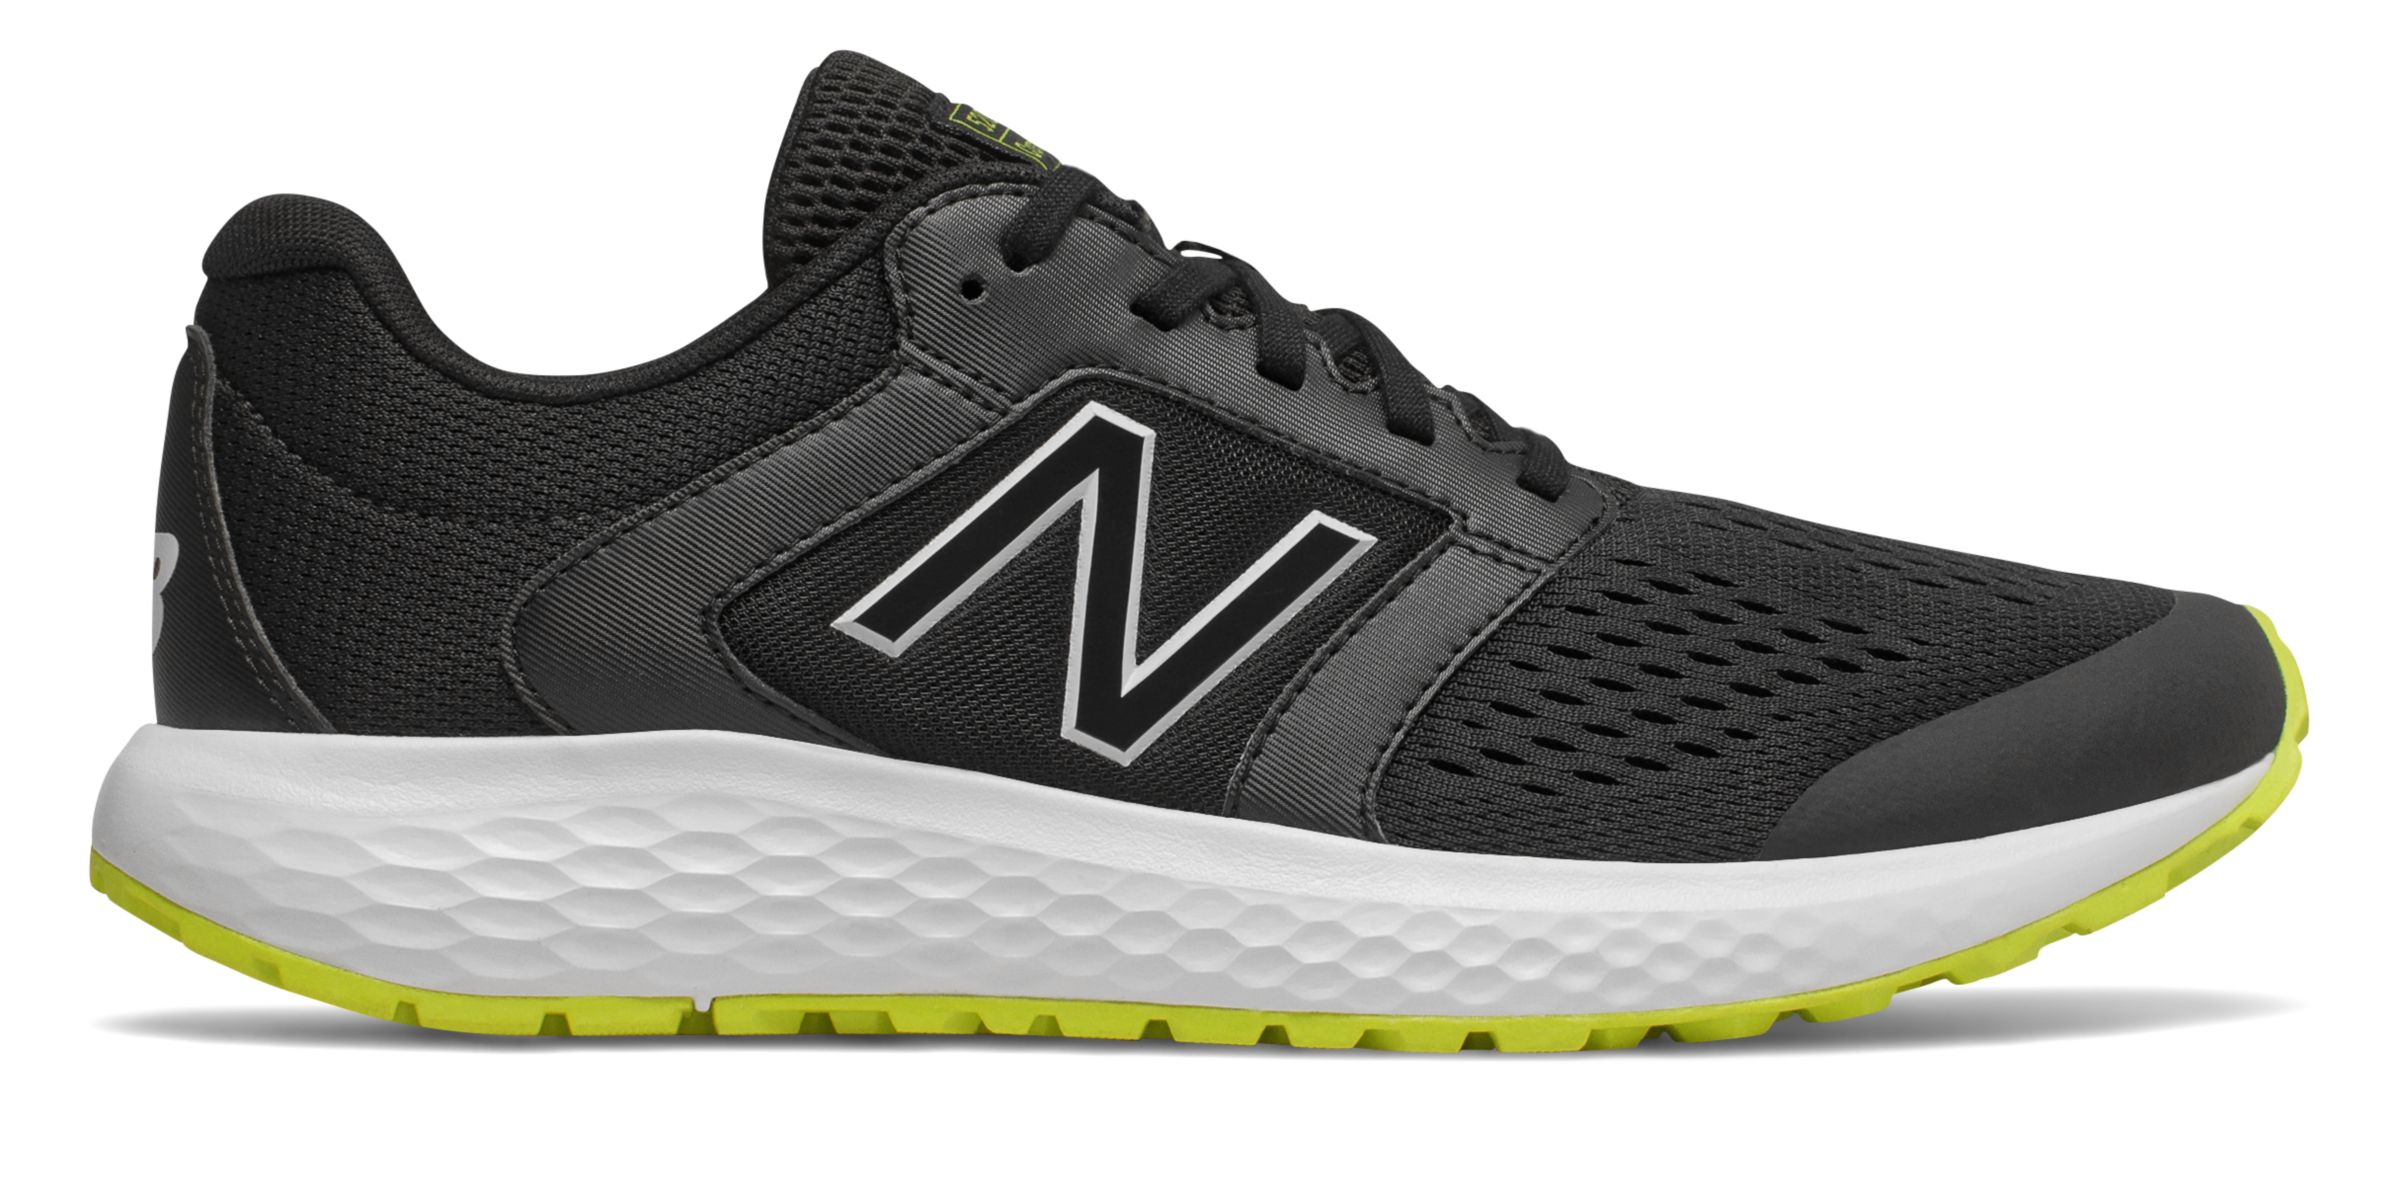 New Balance M520V5-26236-M on Sale - Discounts Up to 25% Off on M520CR5 at  Joe's New Balance Outlet